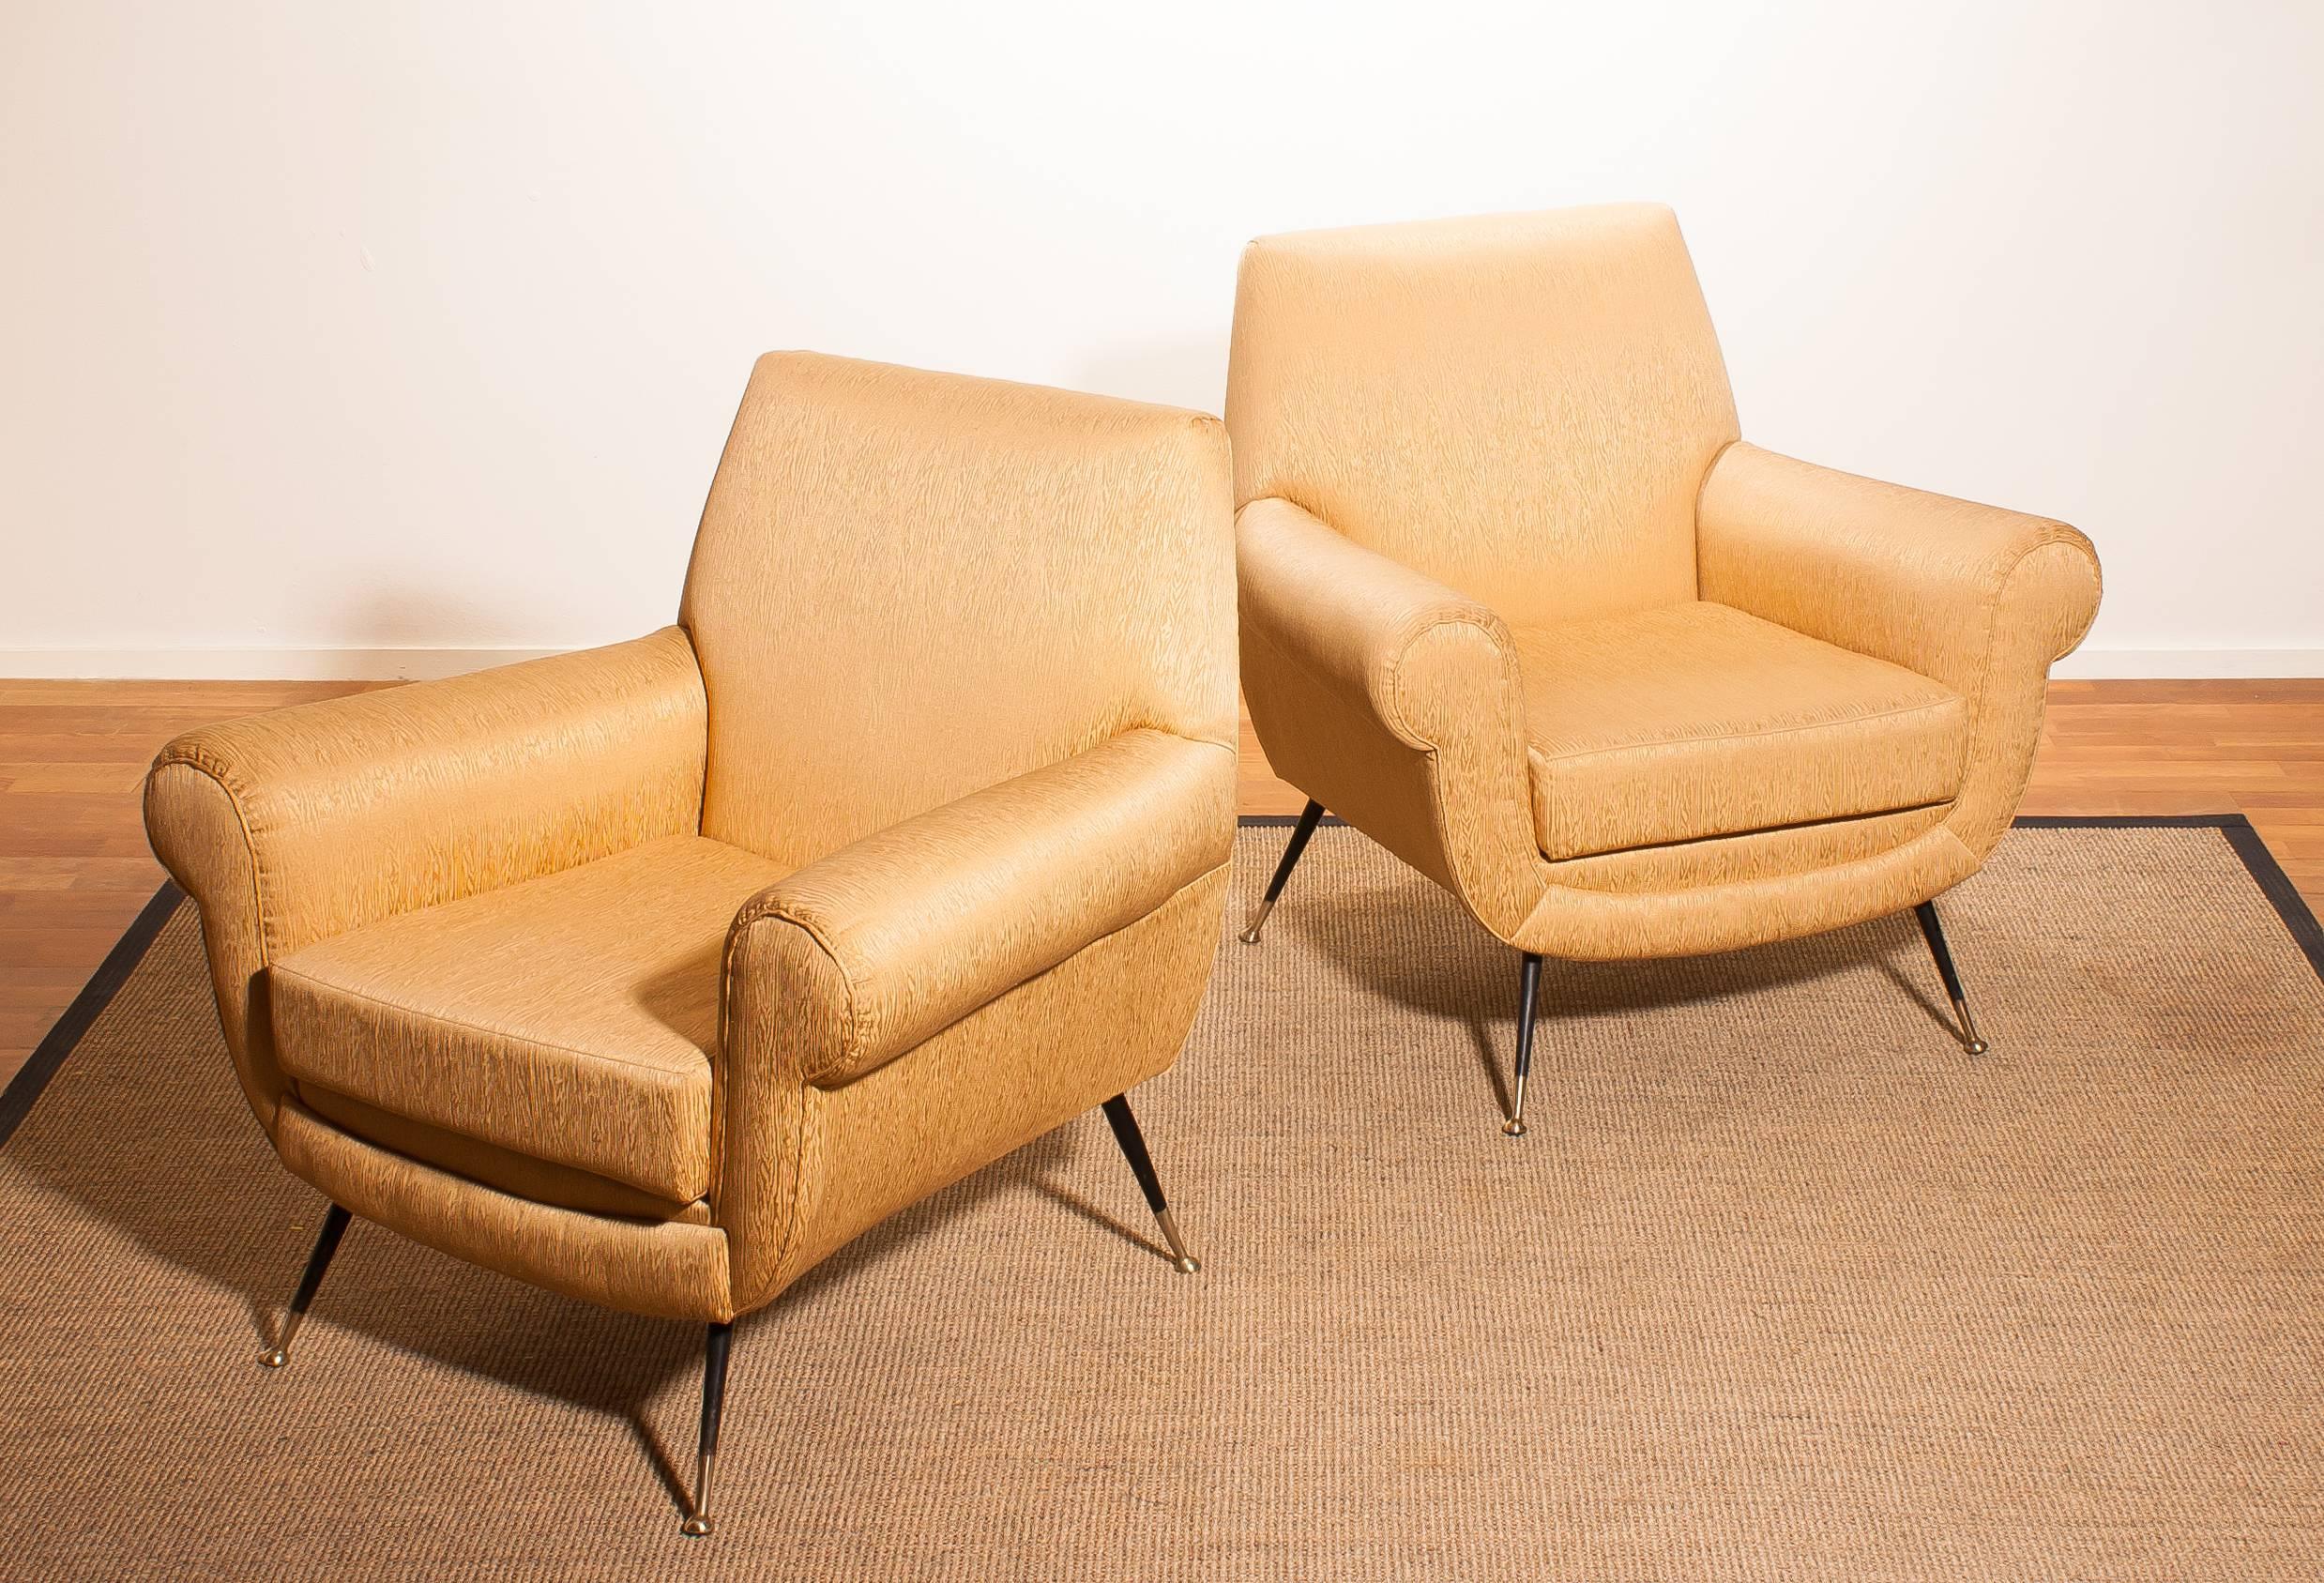 Beautiful and excellent pair of Italian midcentury lounge chairs of the 1950s. With the original brass stiletto legs and gold colored jacquard fabric (later period), all in perfect condition and with a extremely comfortable sit.
Designed by Gigi